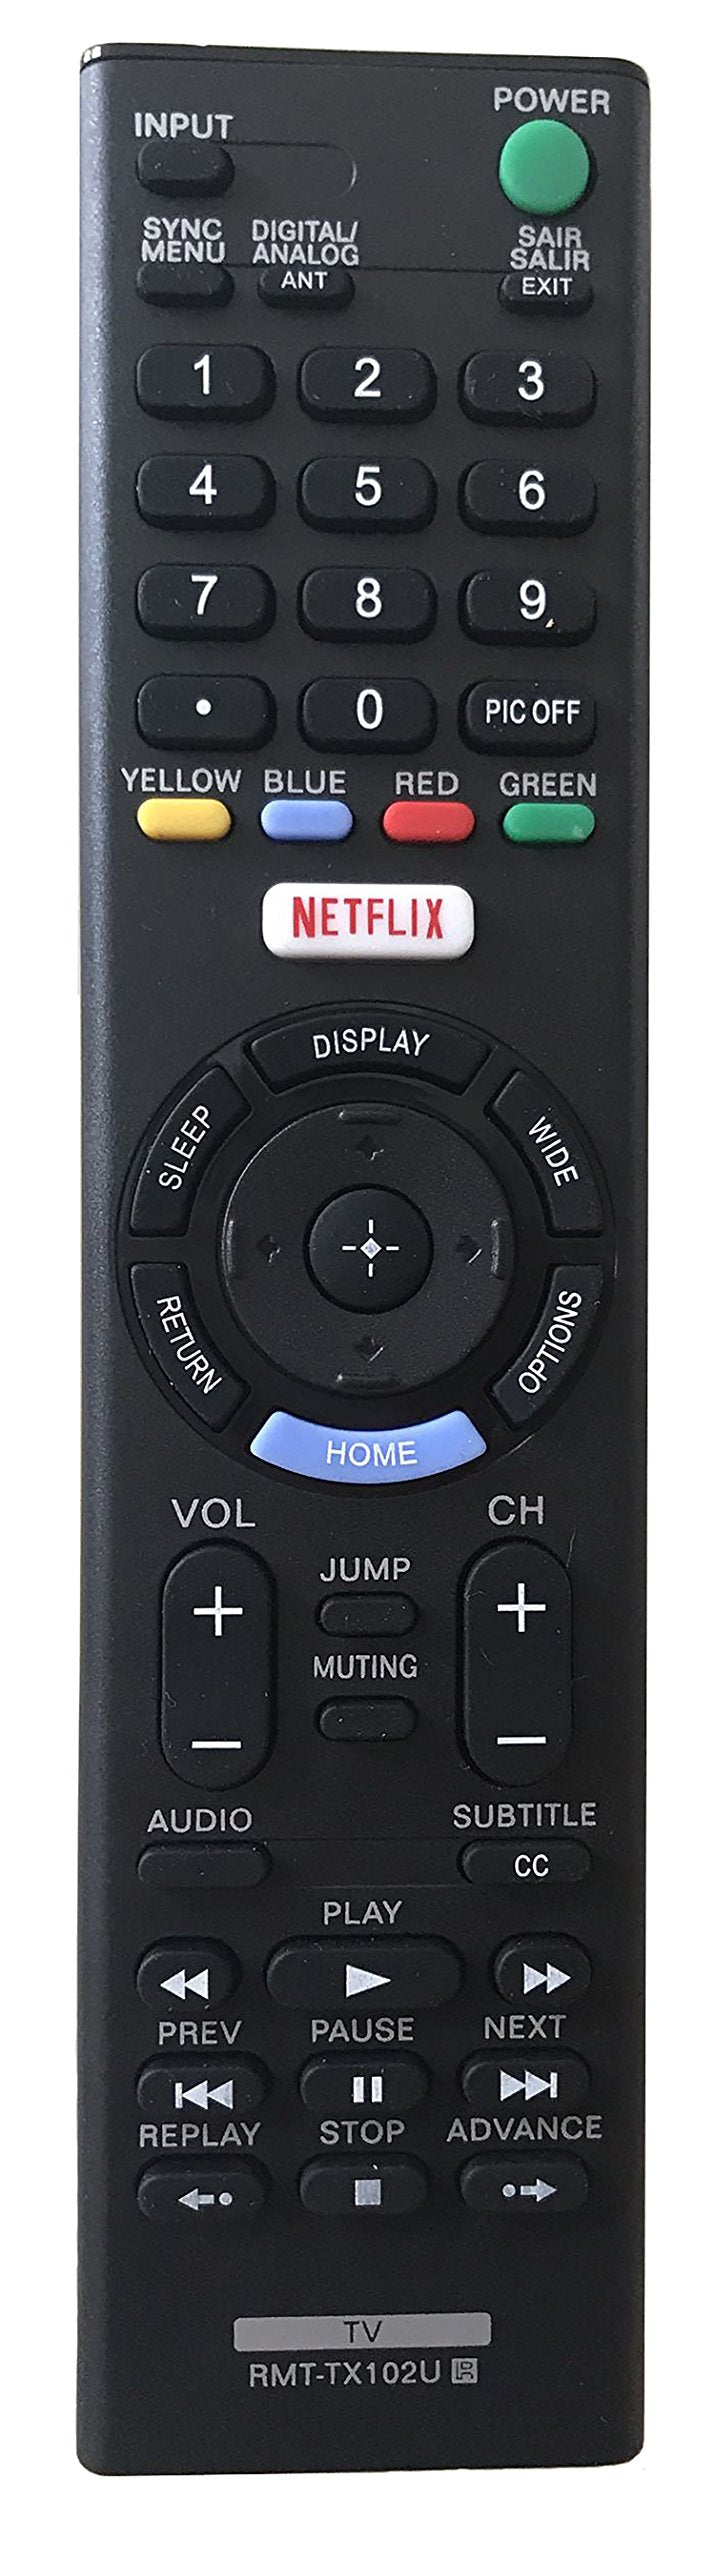 Universal Remote Control for Sony TV KDL48R510C KDL-48R510C KDL40R510C KDL-40R510C KDL32R500C KDL-32R500C KDL40R550C KDL-40R550C KDL48R550C KDL-48R550C